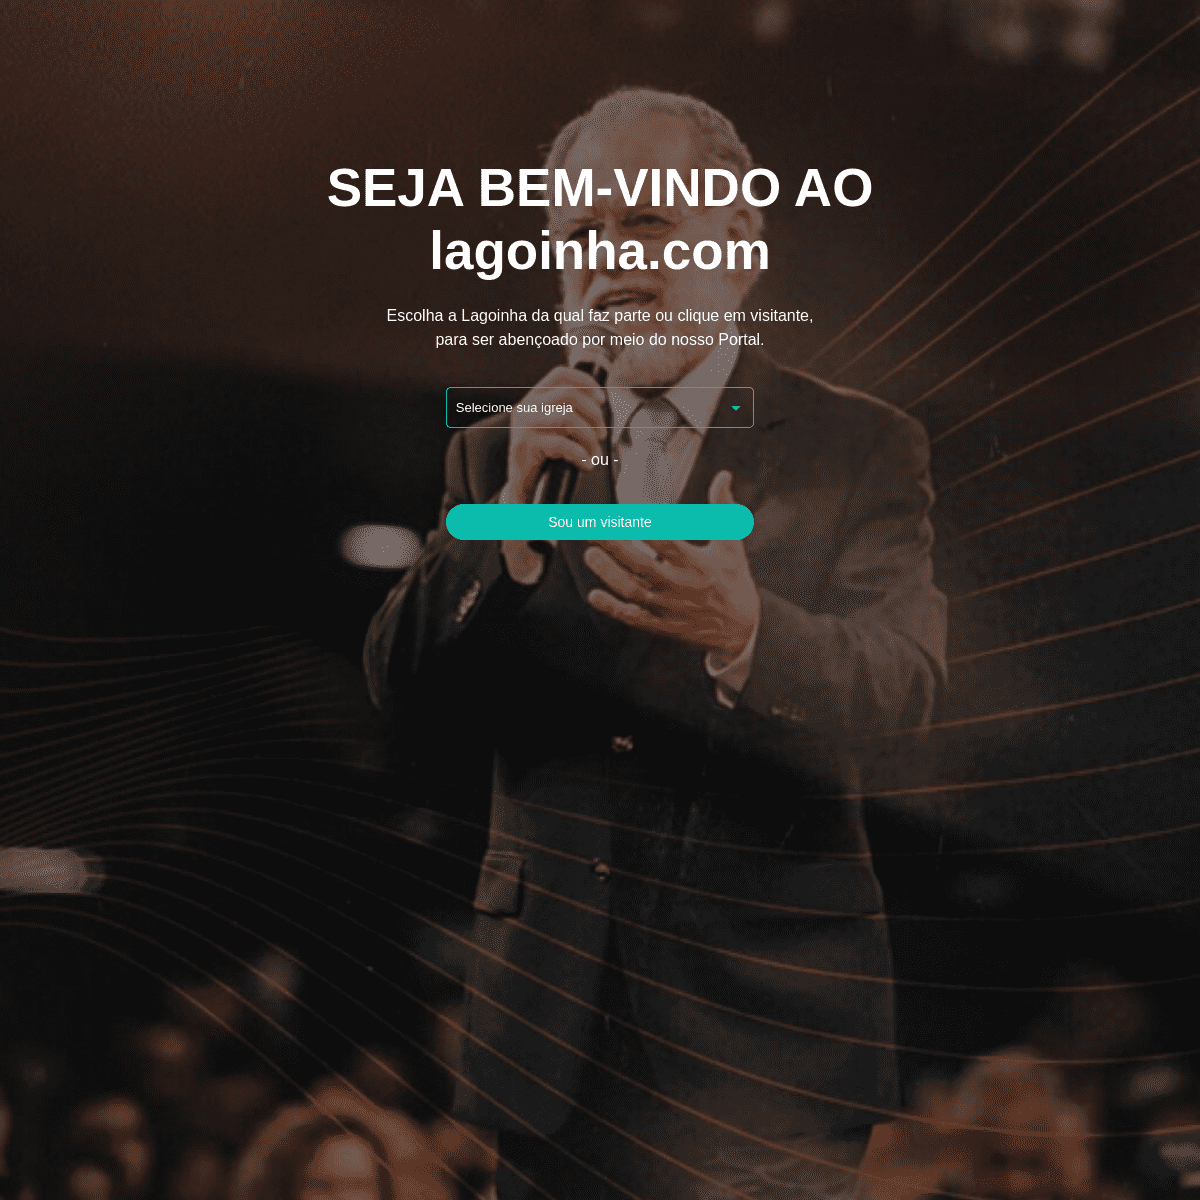 A complete backup of https://lagoinha.com